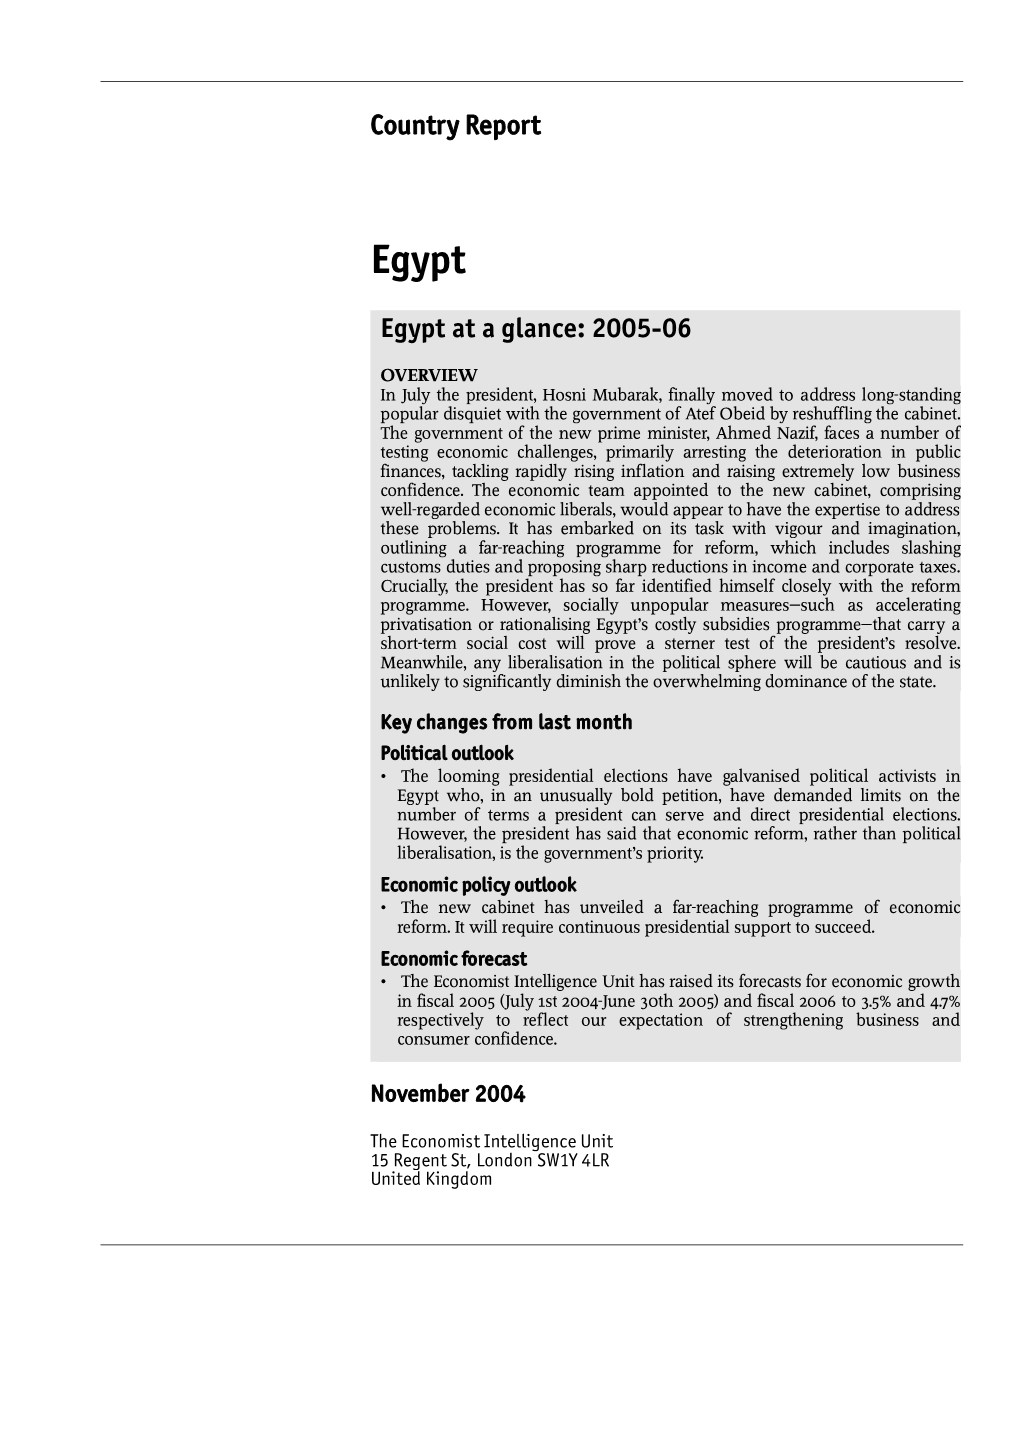 Country Report Egypt at a Glance: 2005-06